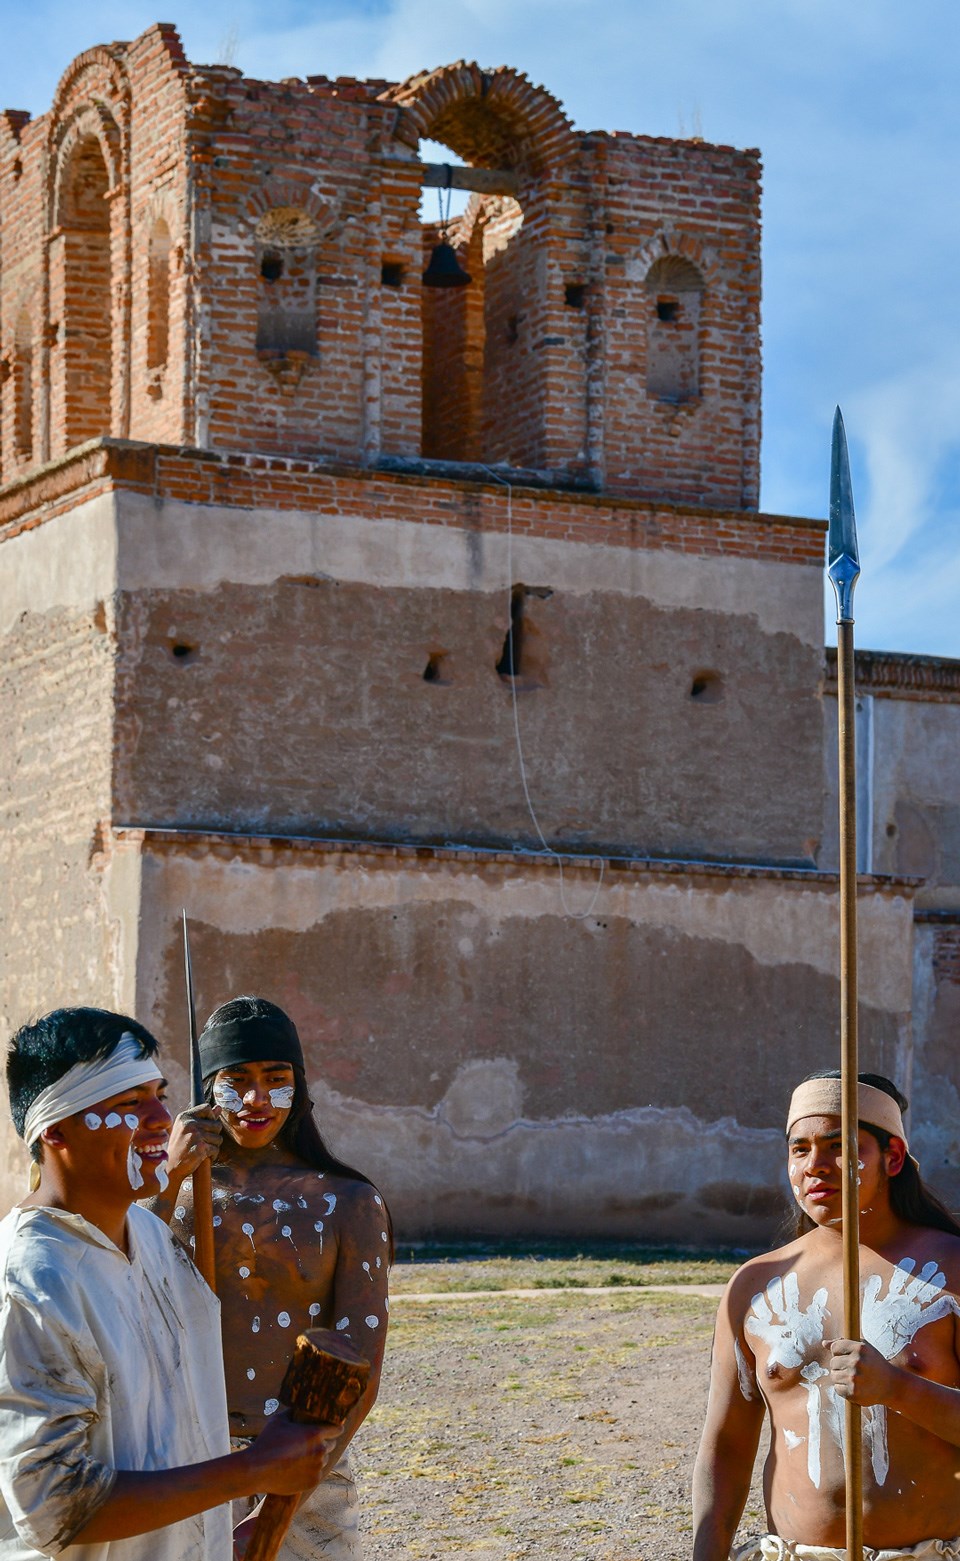 native people in traditional dress in front of church